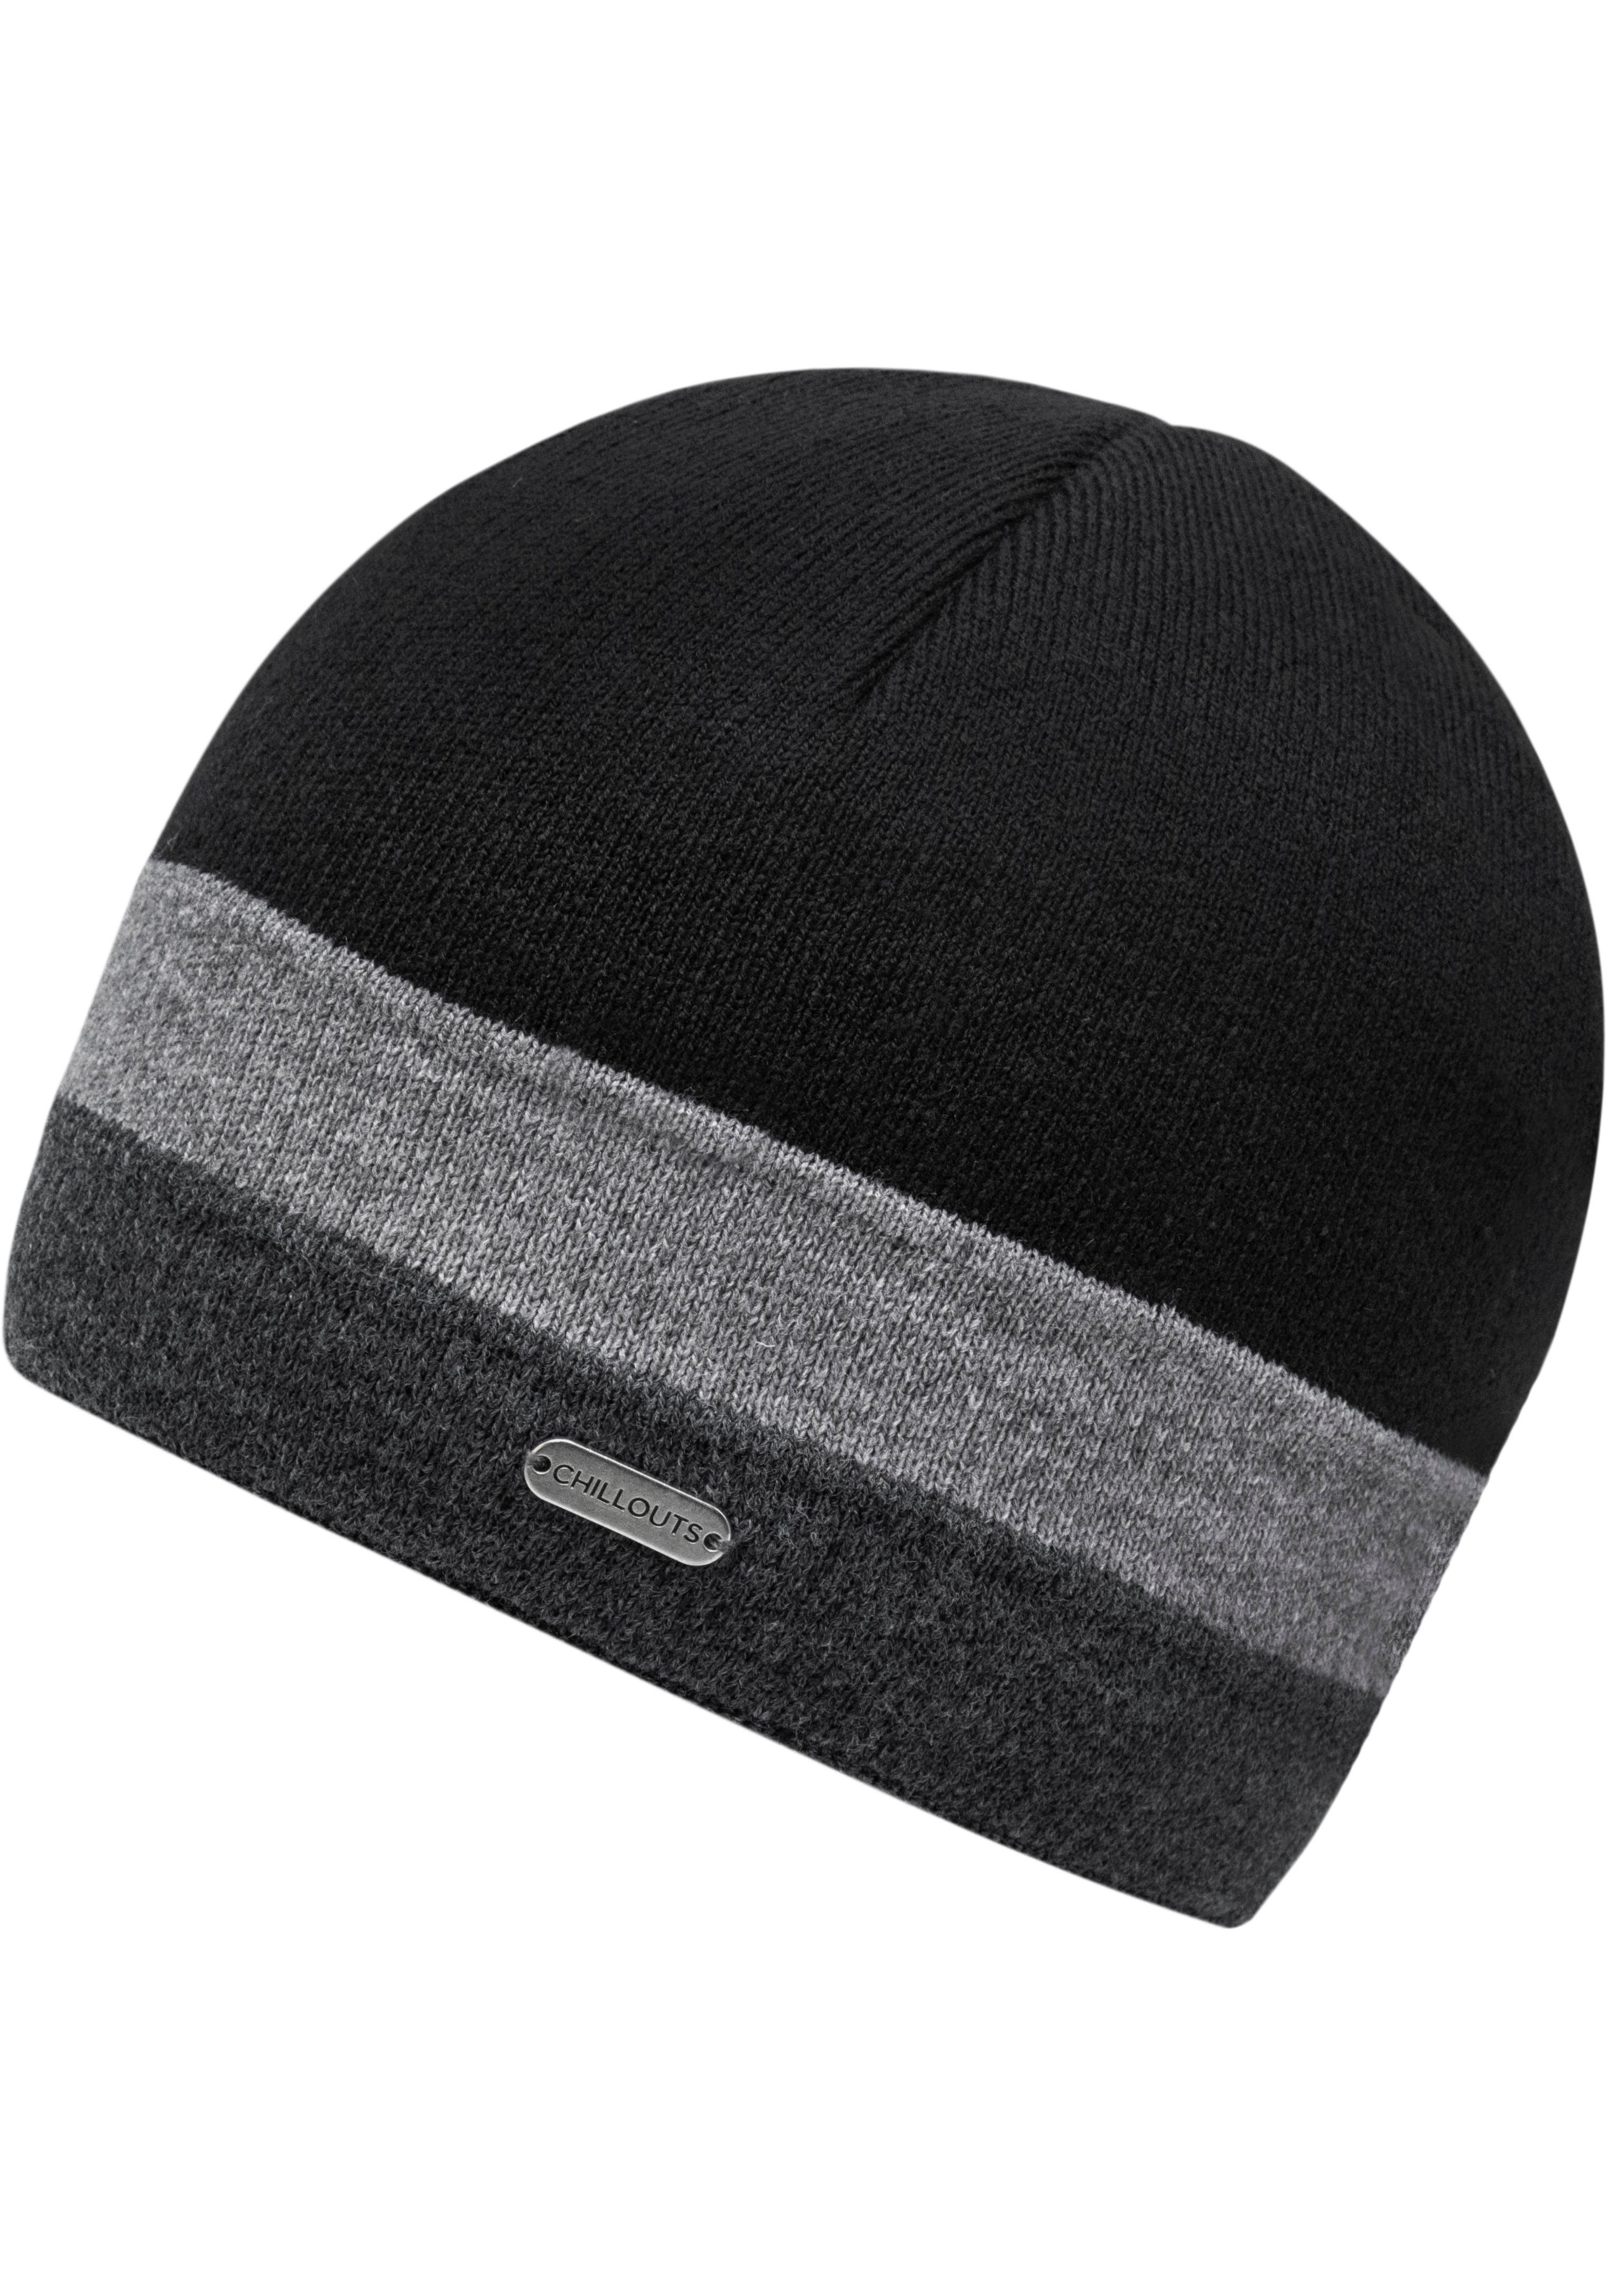 Angenehmes Johnny angesagtes Hat Beanie chillouts Johnny und Hat, Accessoire